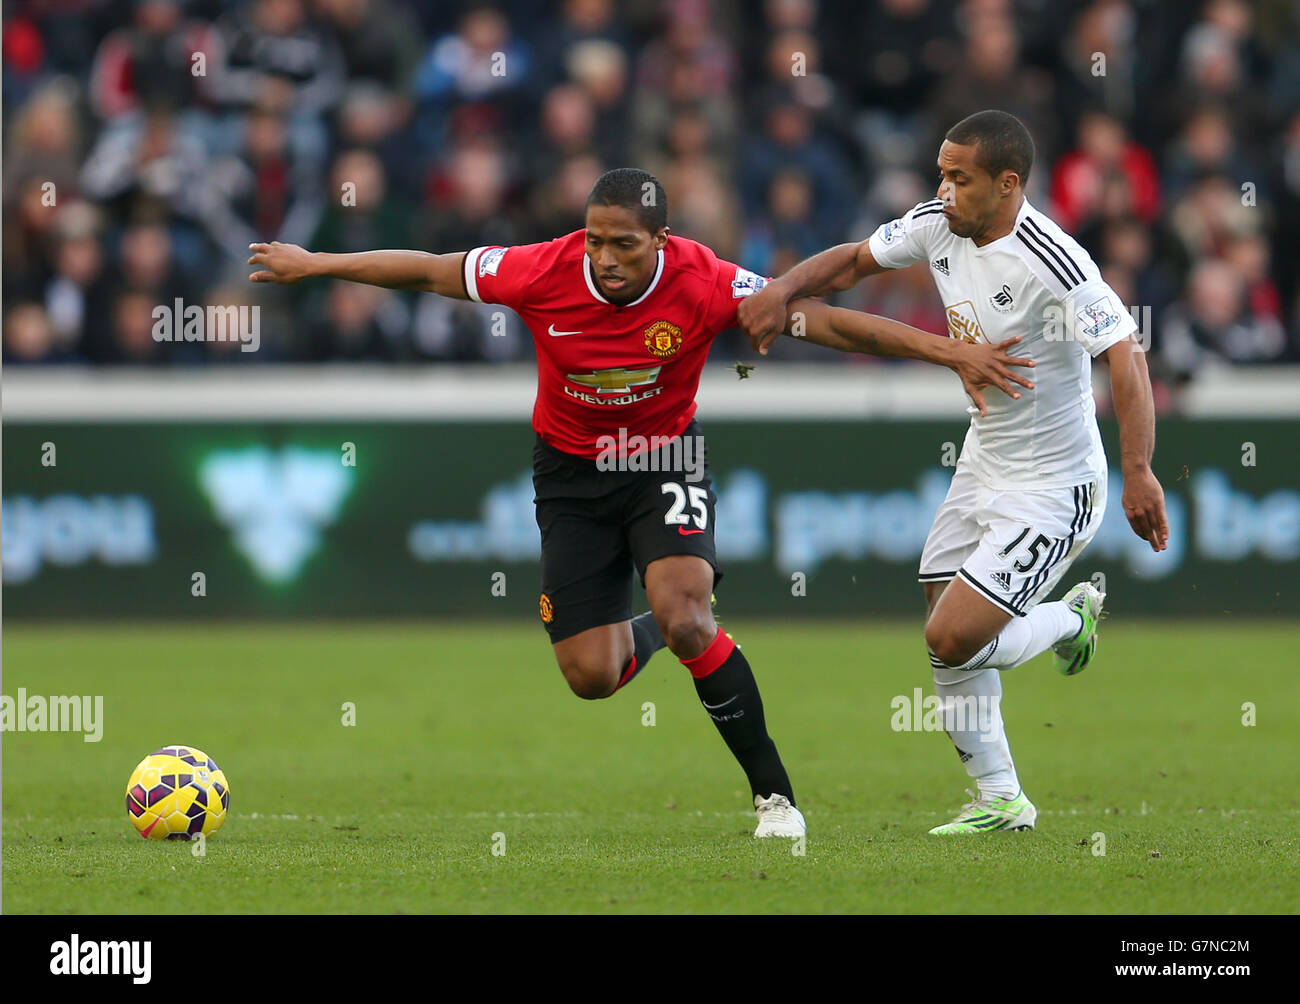 Manchester United's Antonio Valencia and Swansea City's Wayne Routledge battle for the ball during the Barclays Premier League match at the Liberty Stadium, Swansea. PRESS ASSOCIATION Photo. Picture date: Saturday February 21, 2015. See PA story SOCCER Swansea. Photo credit should read: David Davies/PA Wire. Stock Photo